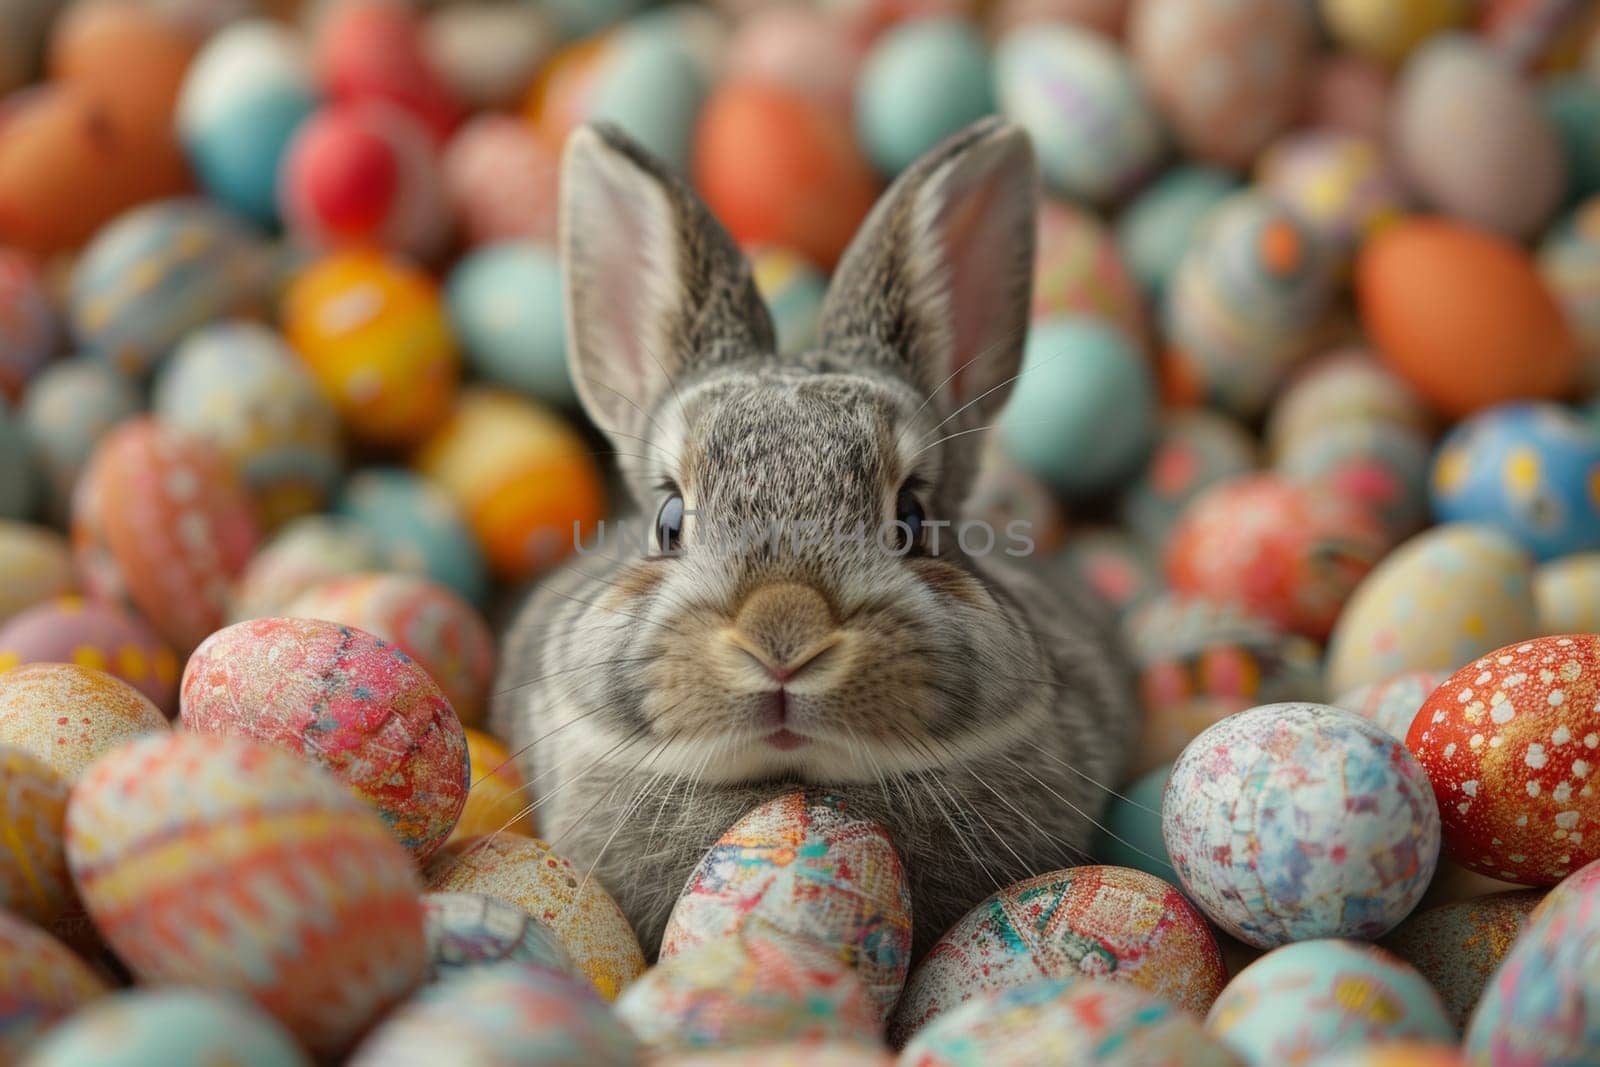 A rabbit is sitting in a pile of colorful Easter eggs. The scene is playful and whimsical, with the rabbit being the main focus of the image